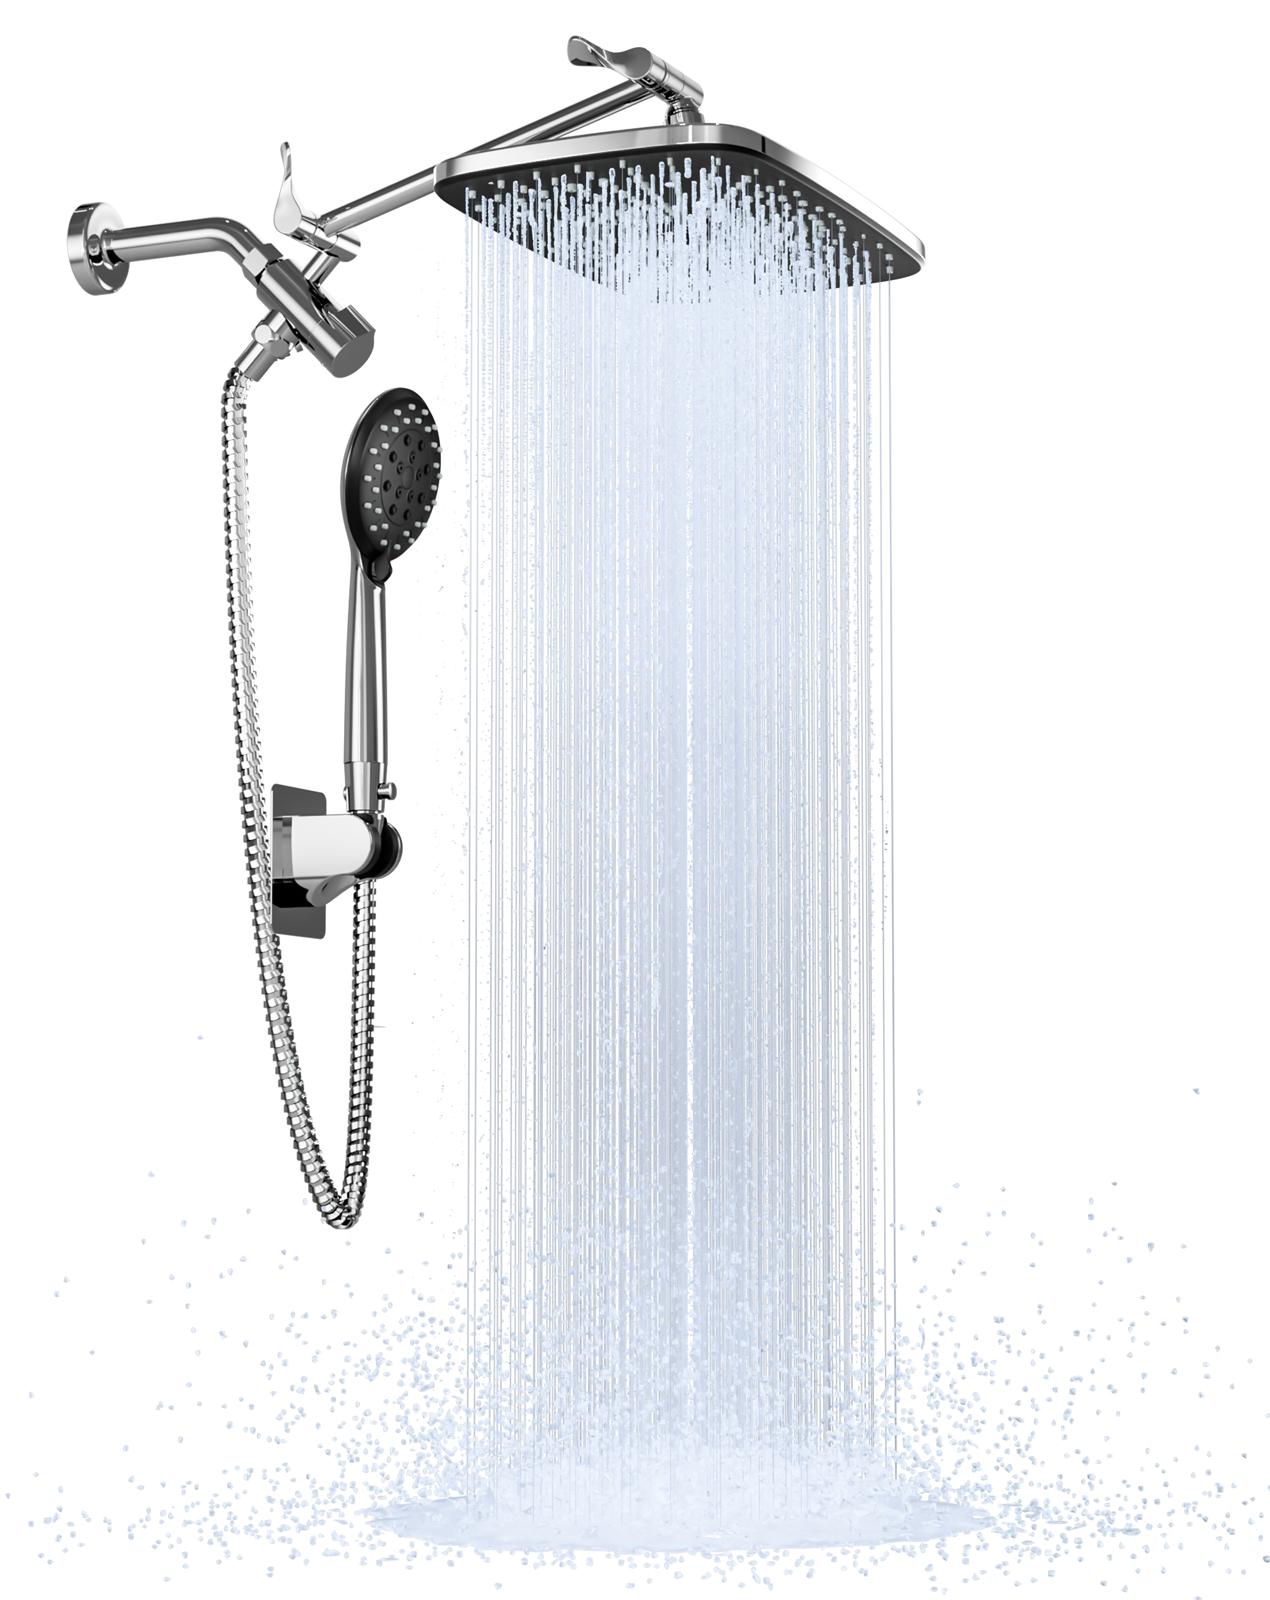 Ophanie 5-Setting High Pressure Shower Head, 12 inch Rain Shower Head with Handheld and Hose, Chrome - image 1 of 9